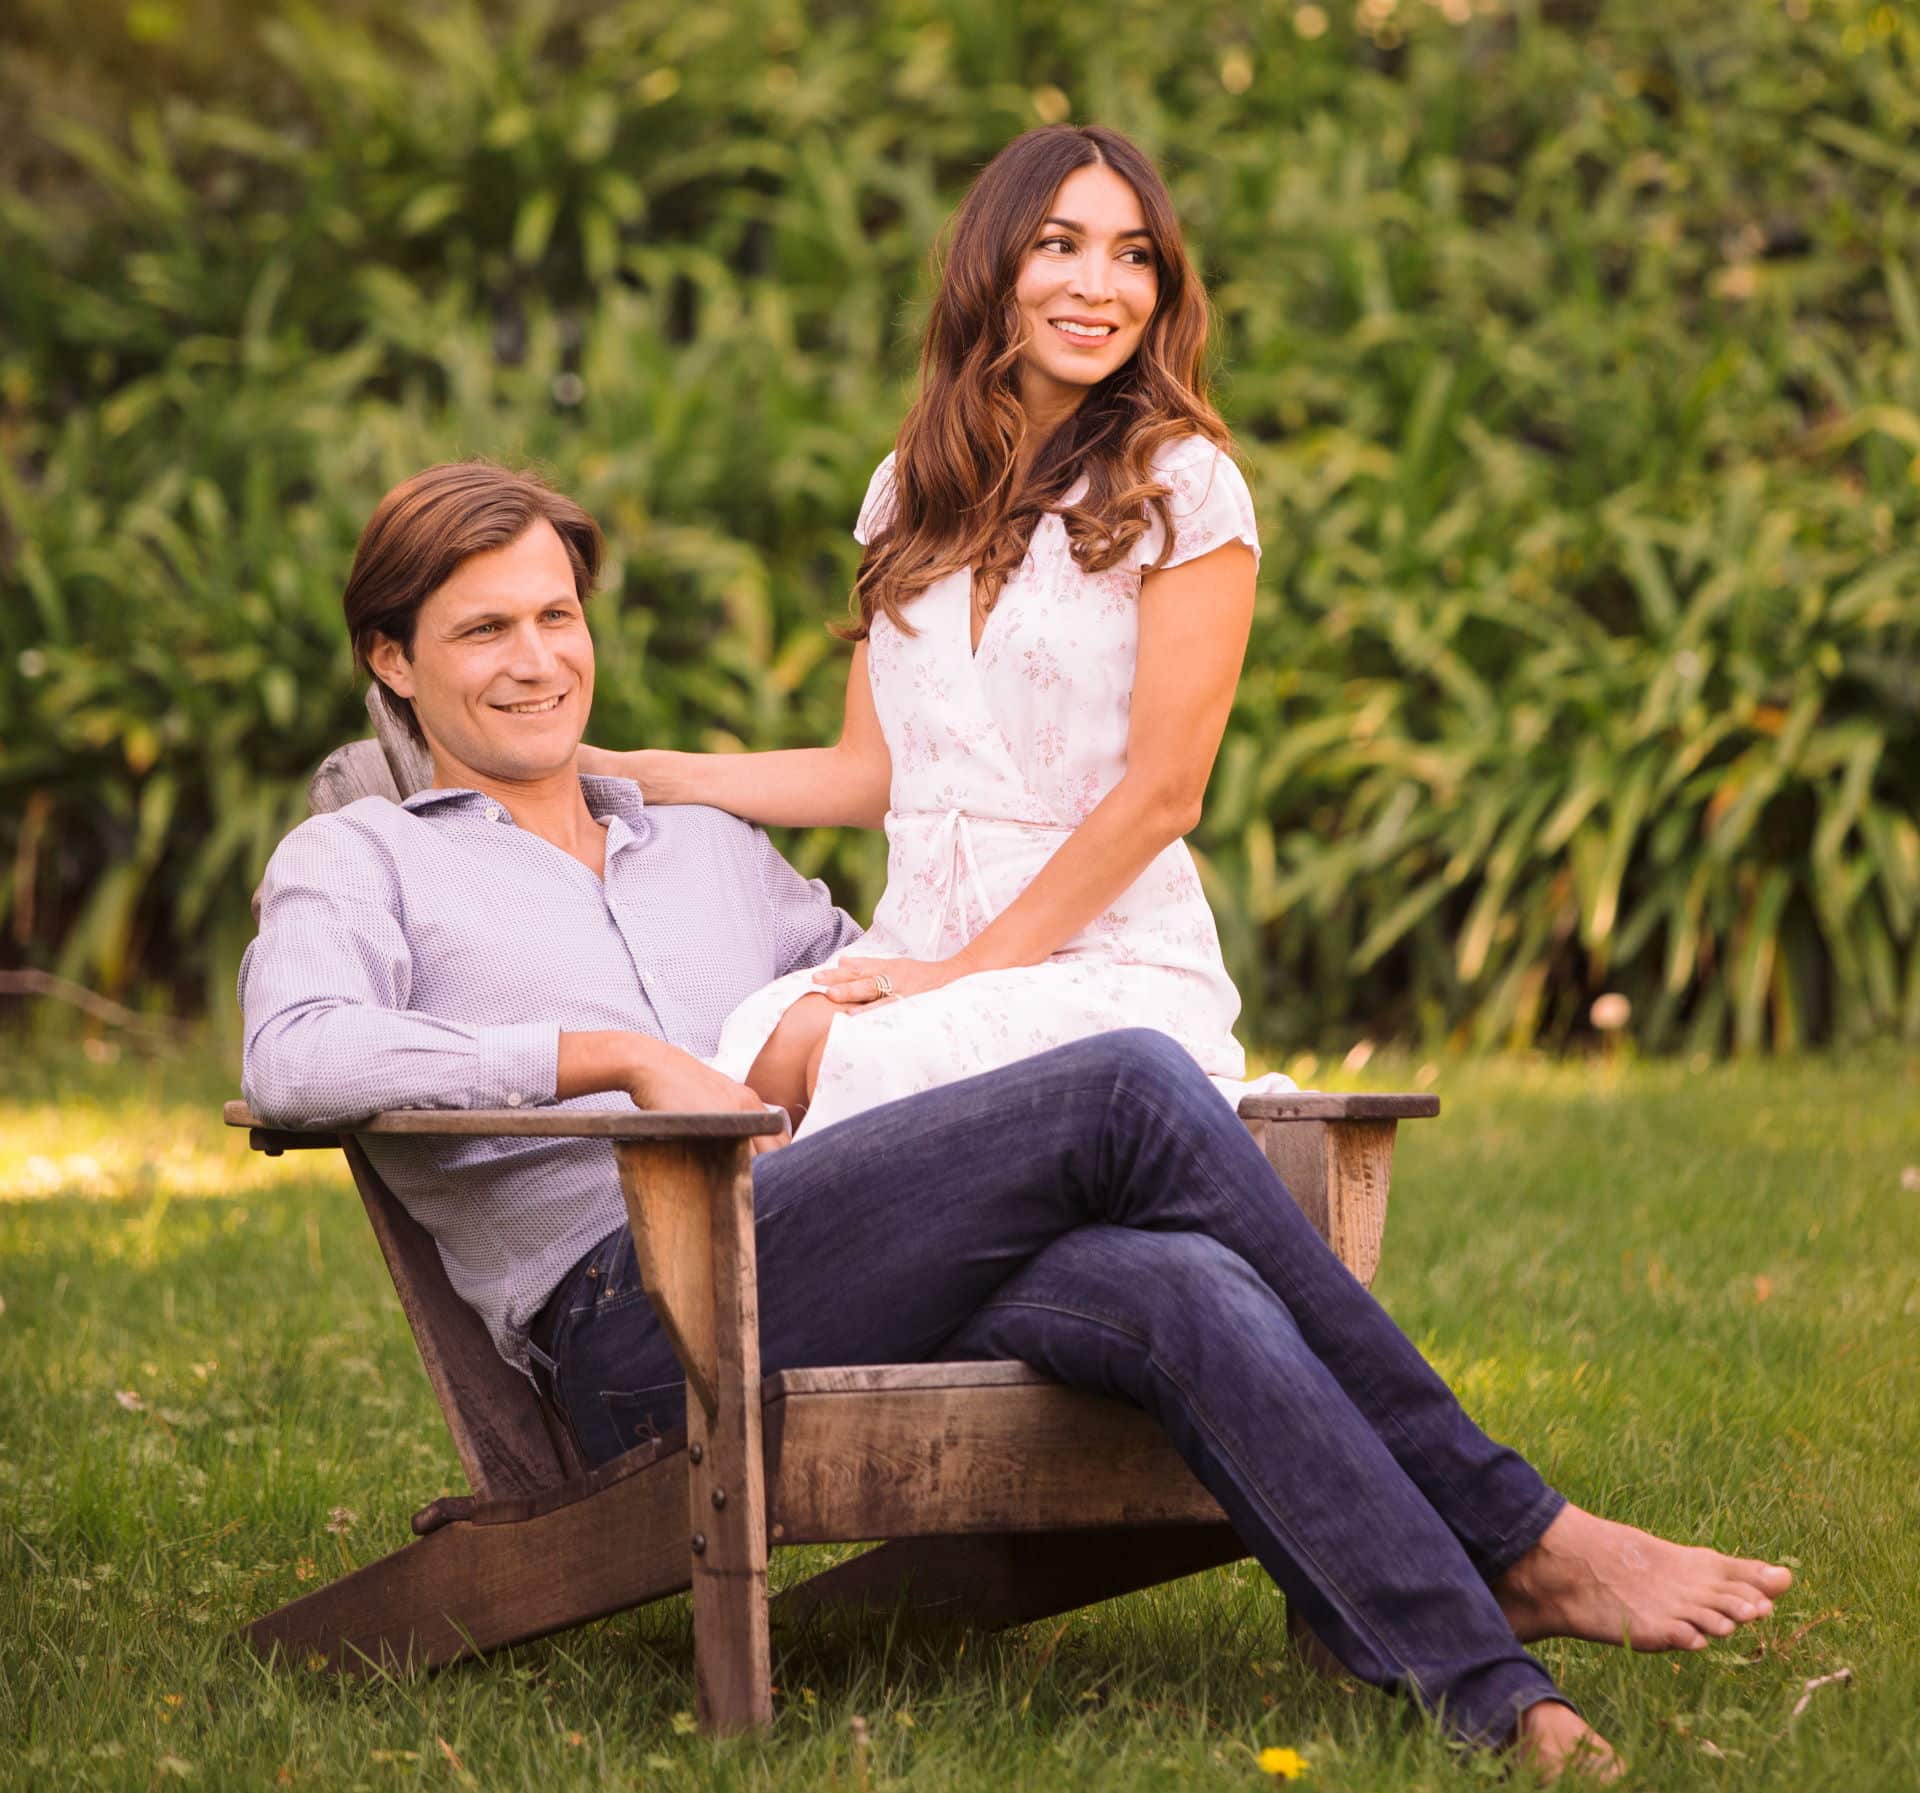 A man and woman sitting on top of a wooden bench.